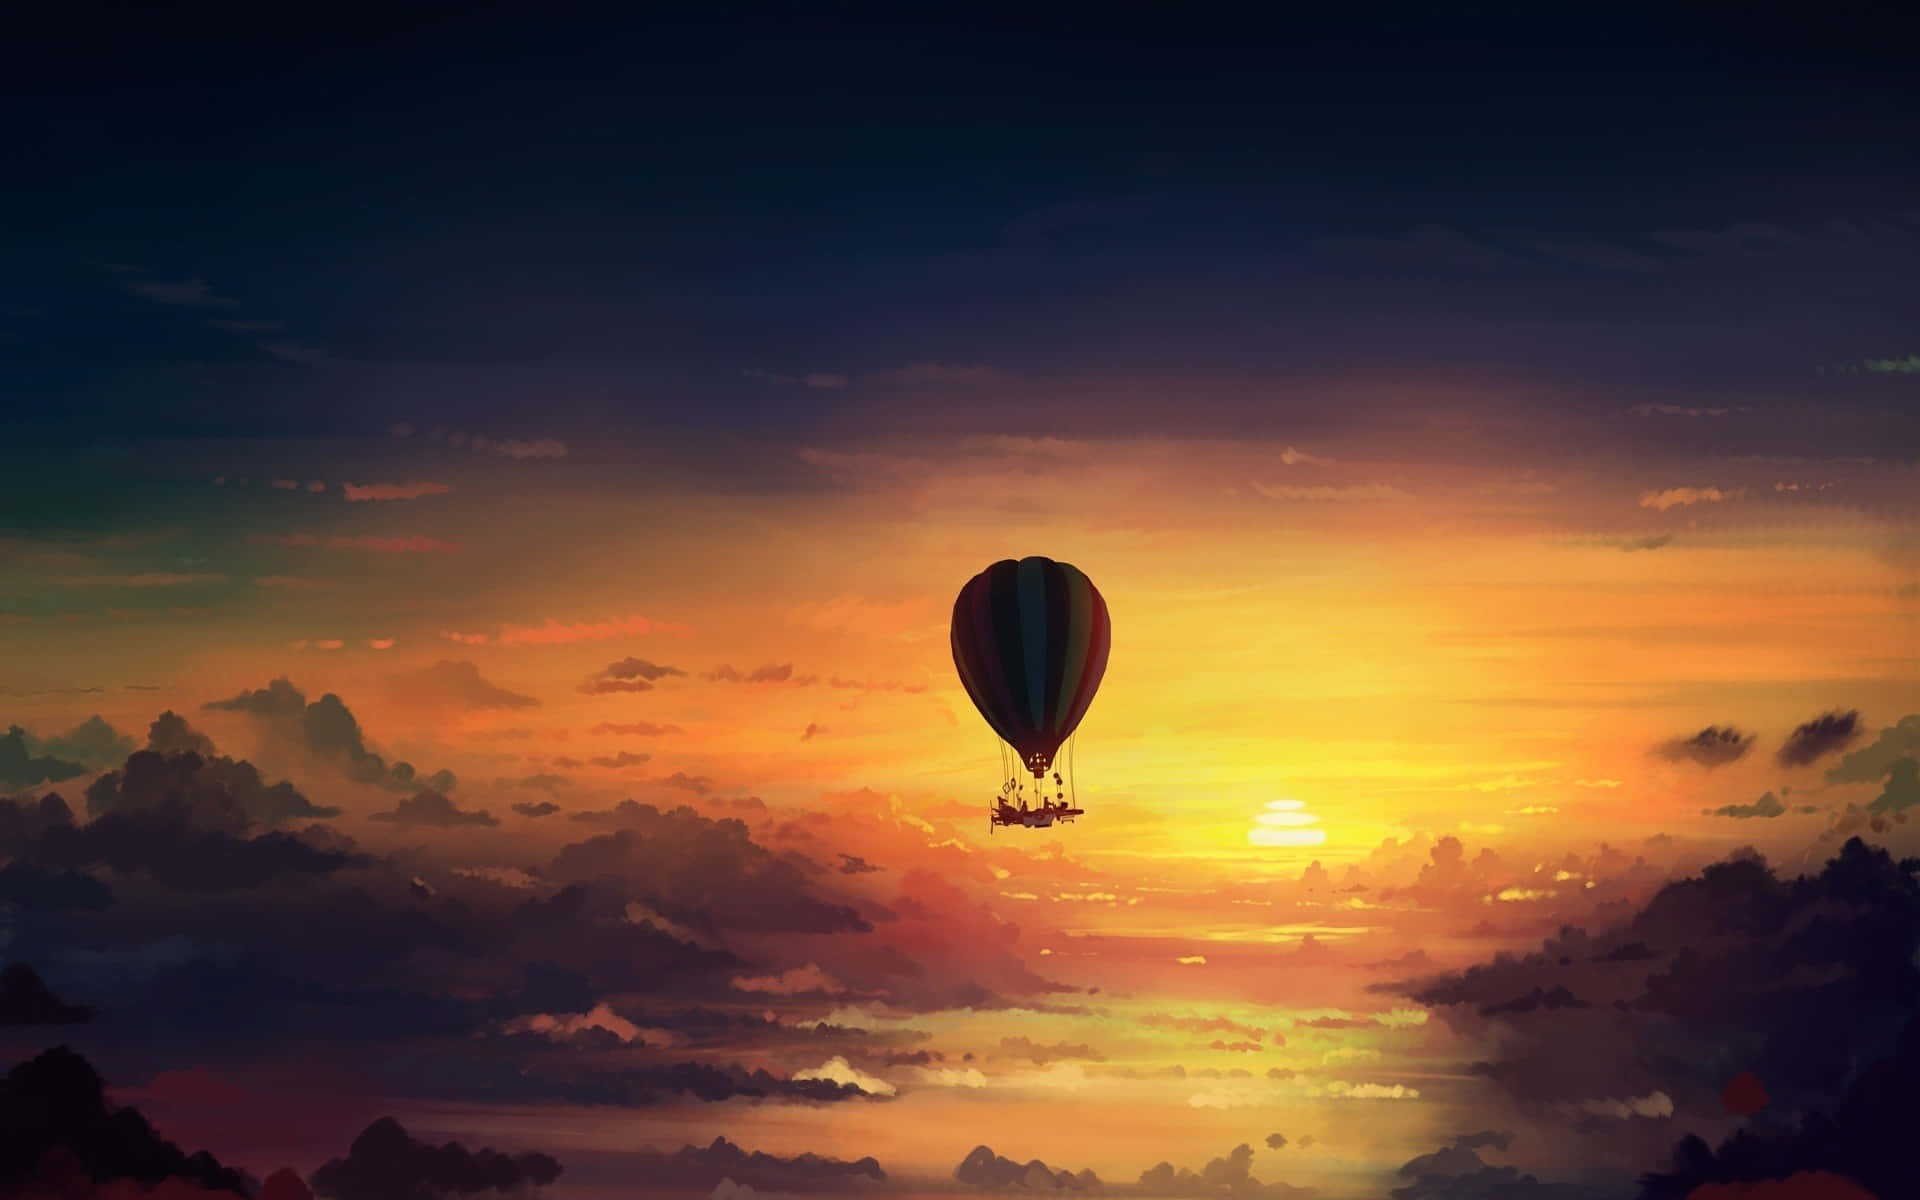 A hot air balloon floats atop a sea of clouds